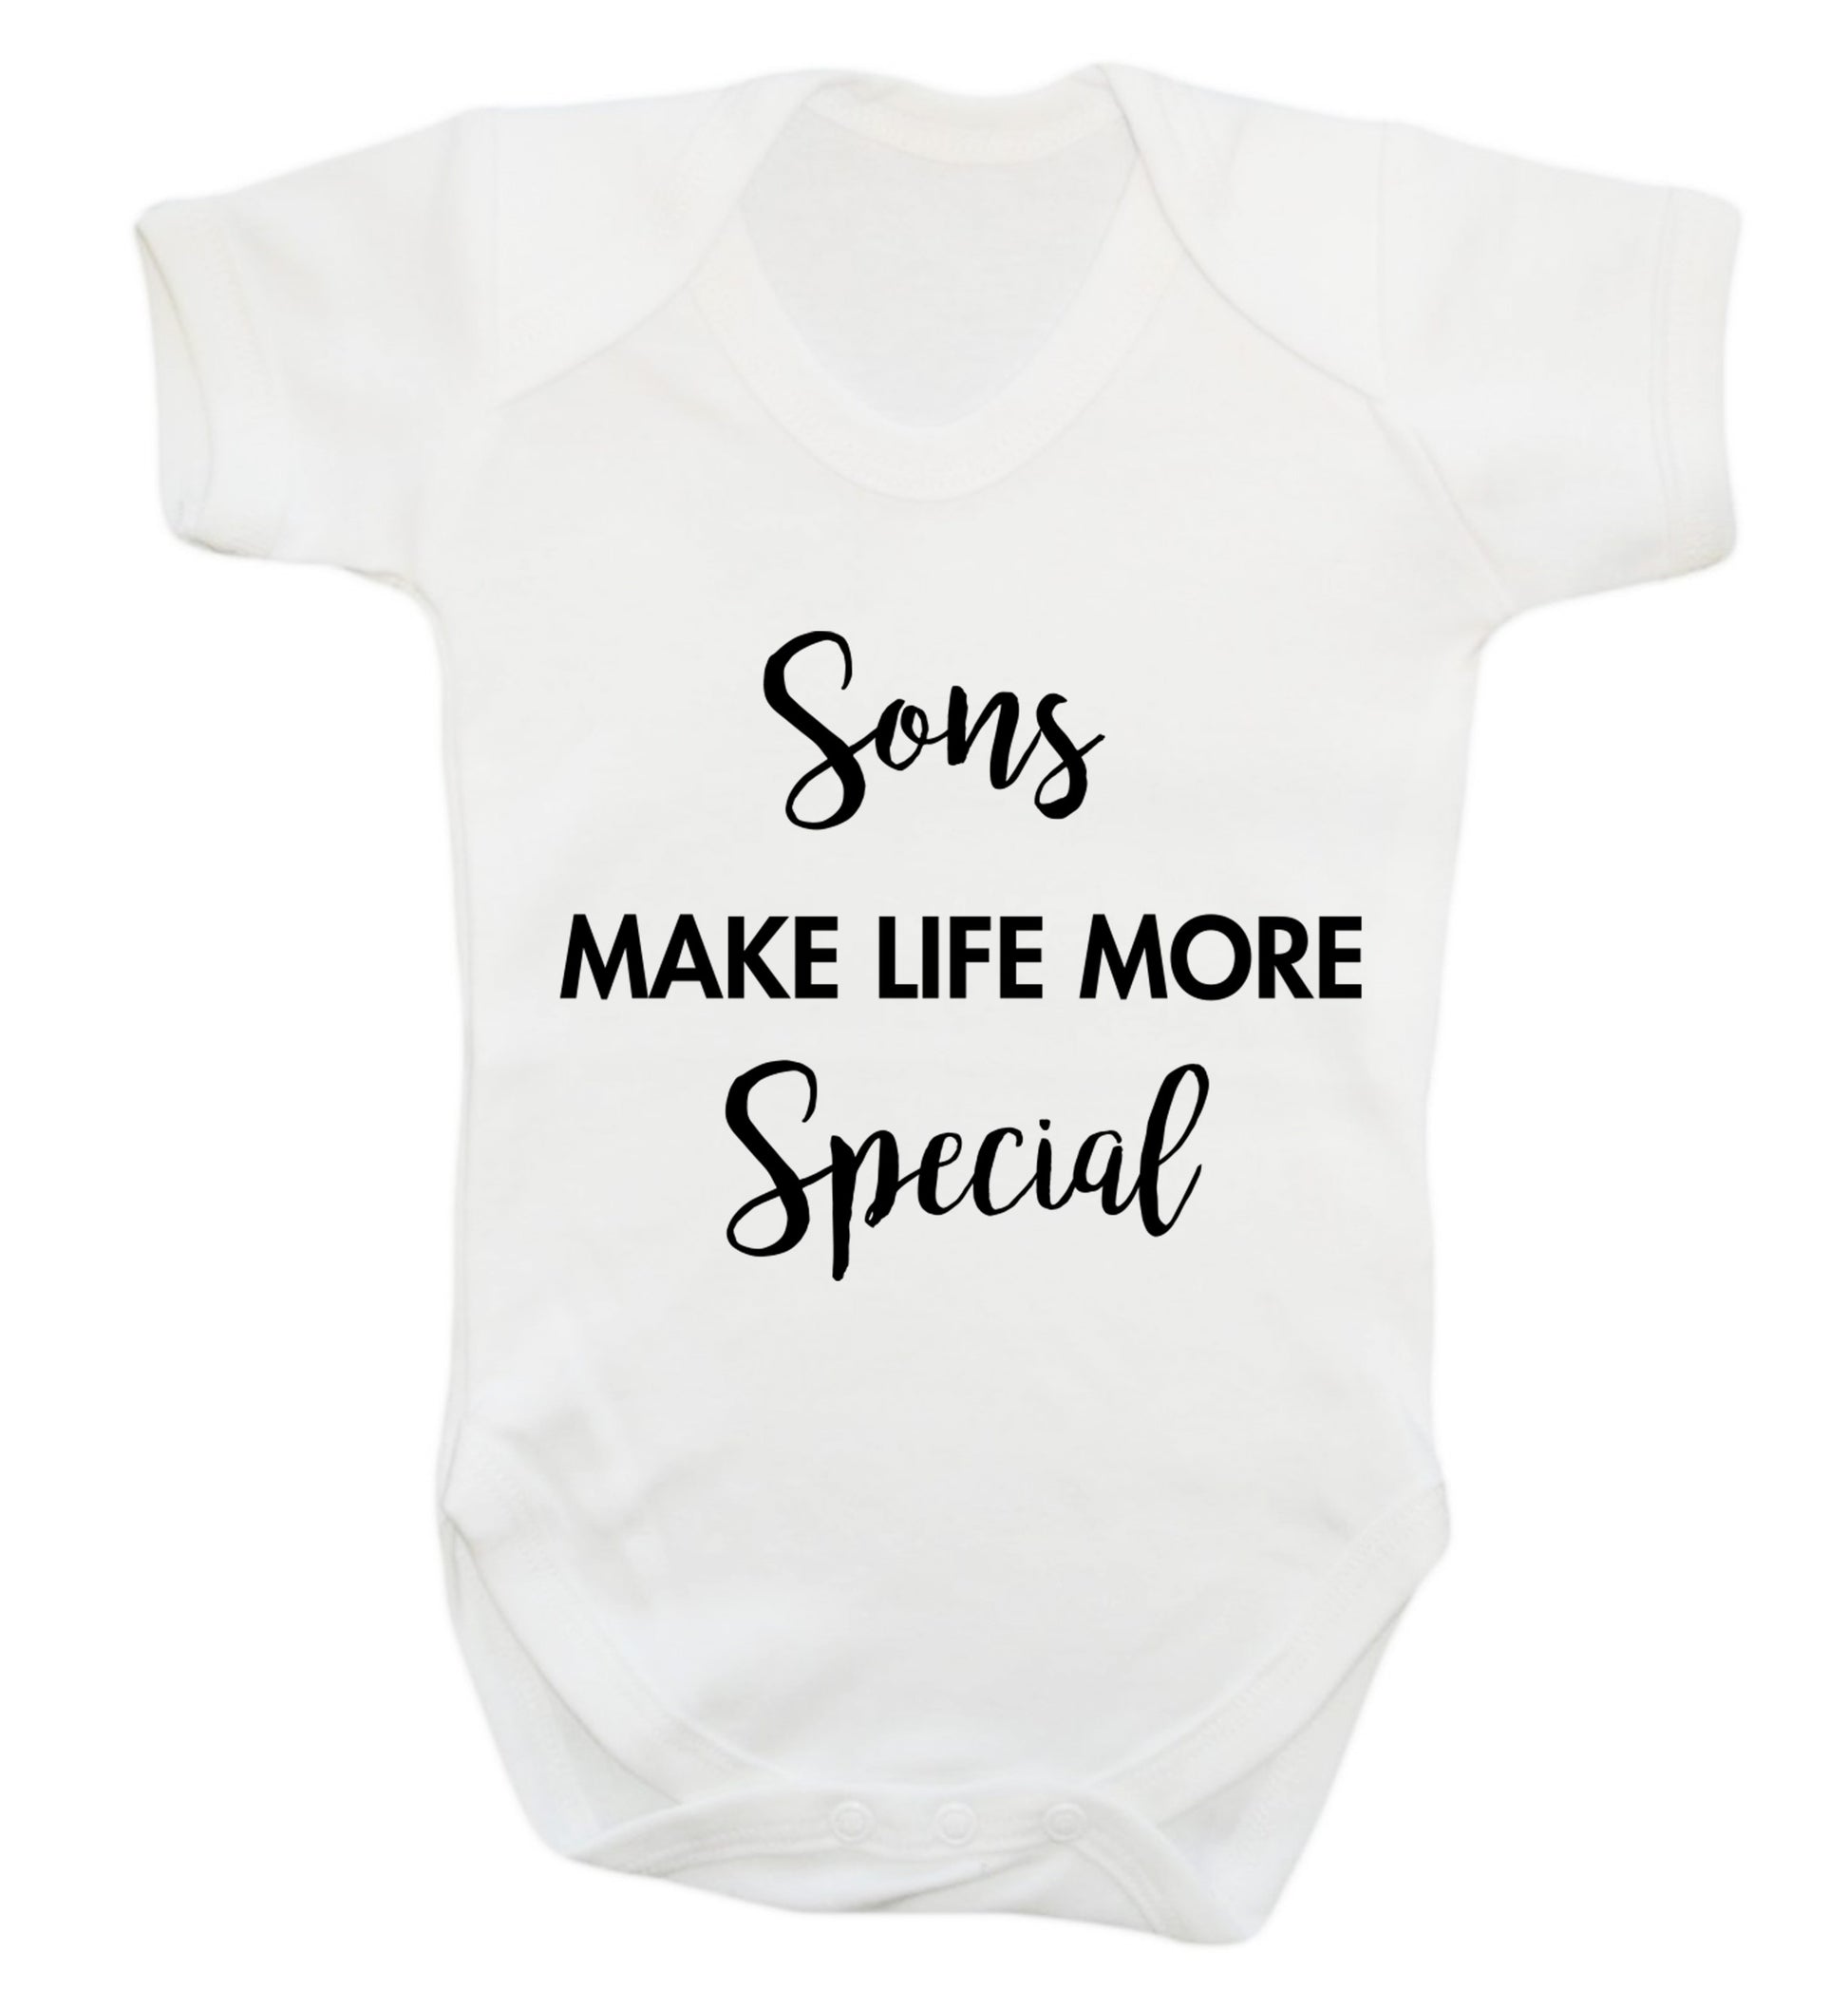 Daughters make life more special Baby Vest white 18-24 months